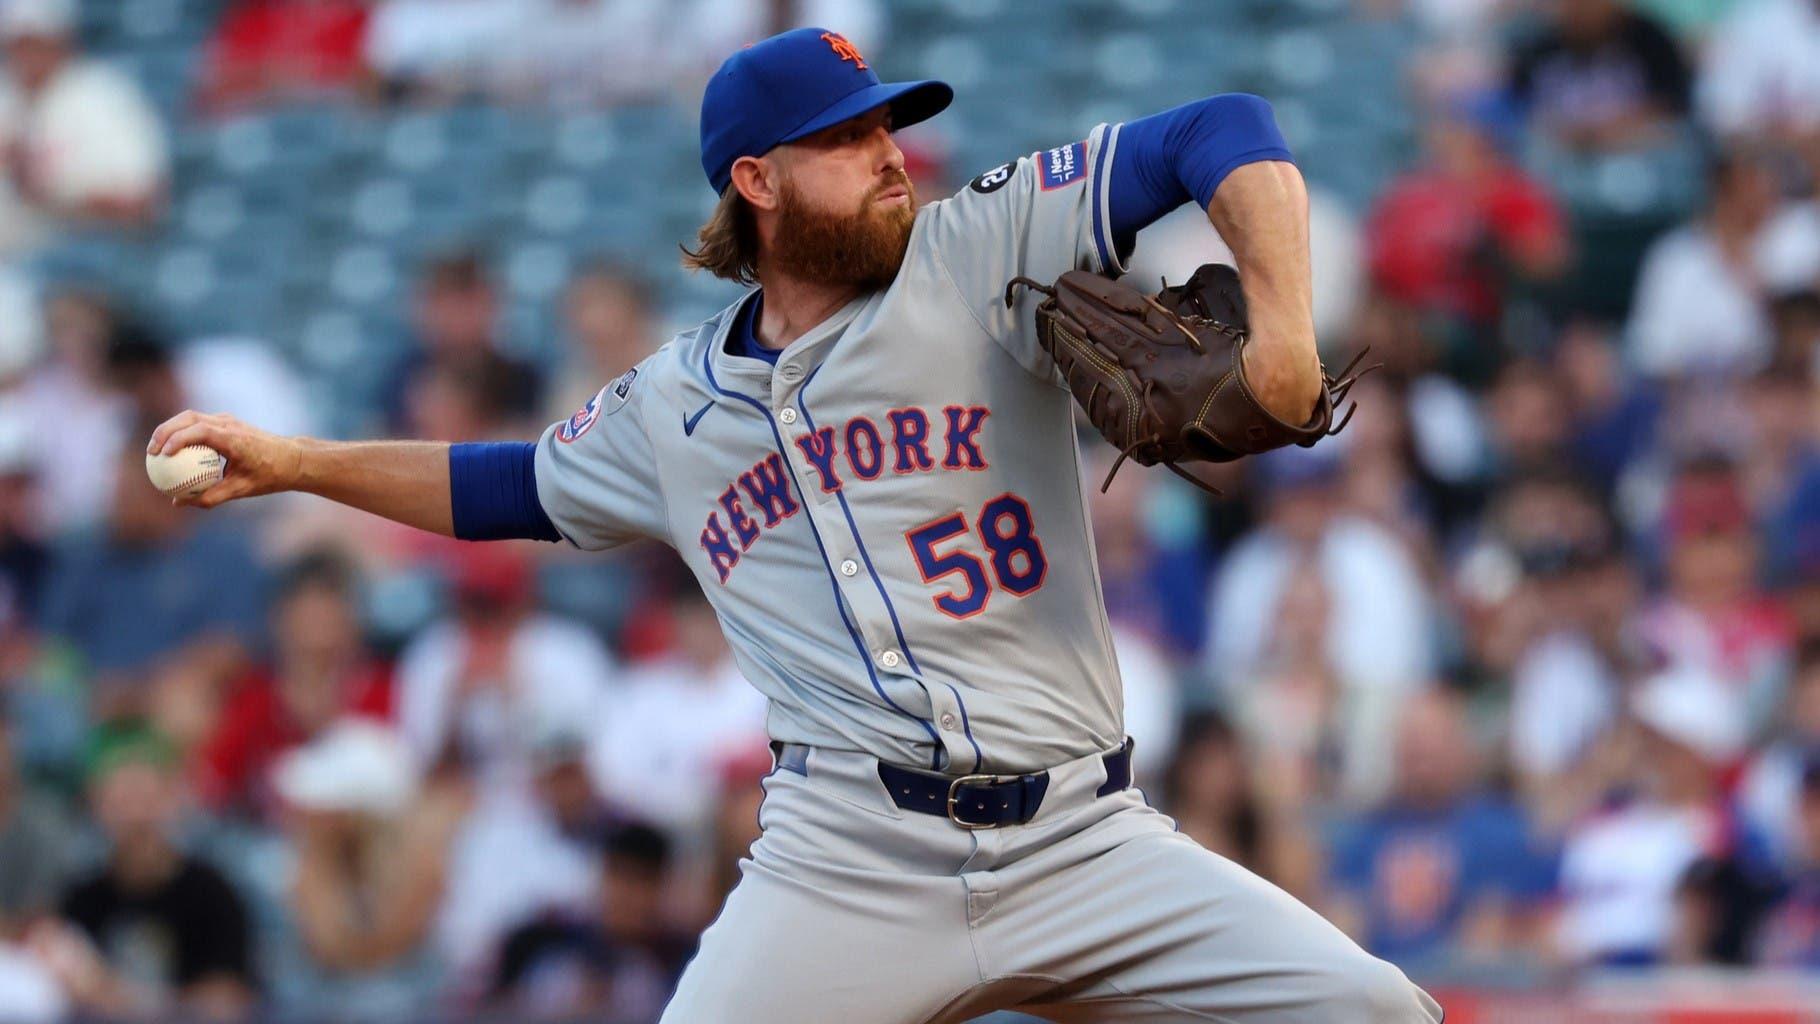 Paul Blackburn enjoying being a part of a playoff race after successful Mets debut